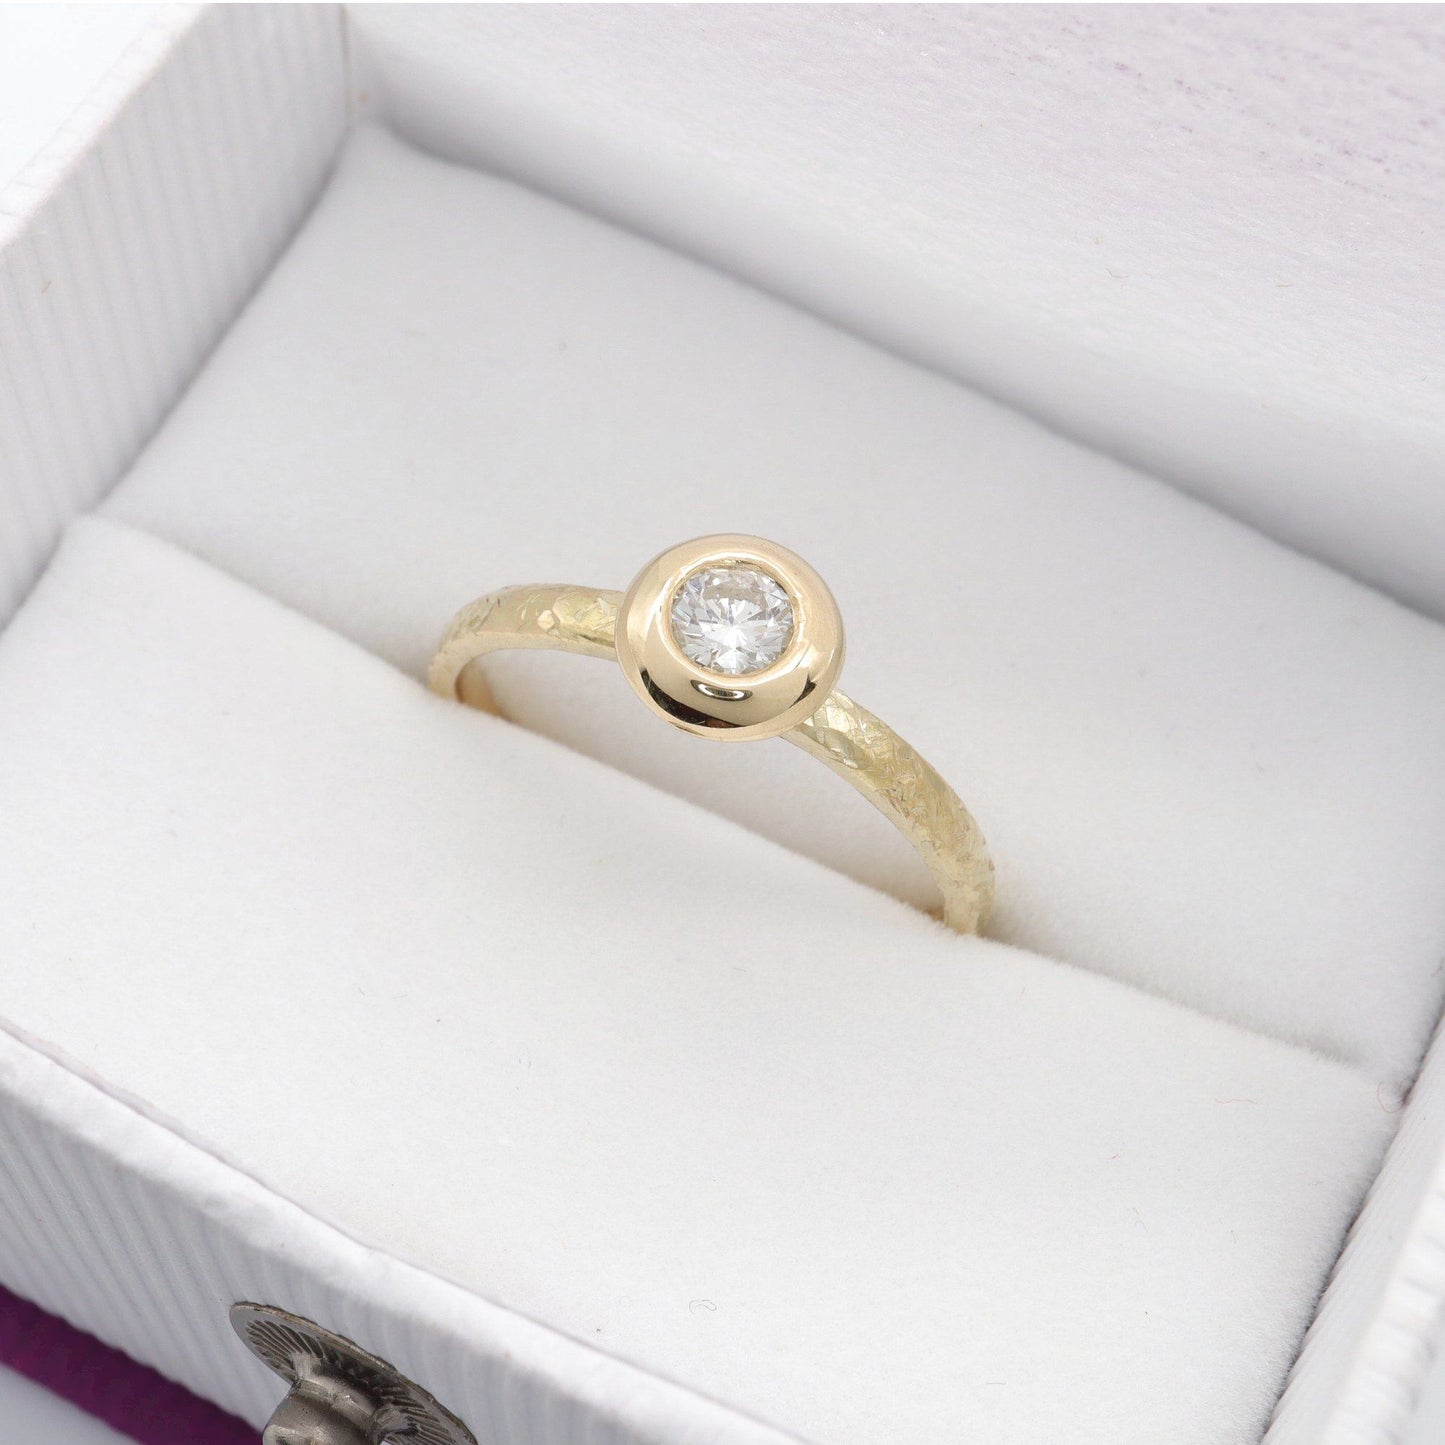 Solitaire diamond ring in 18ct yellow gold with a wide edge setting